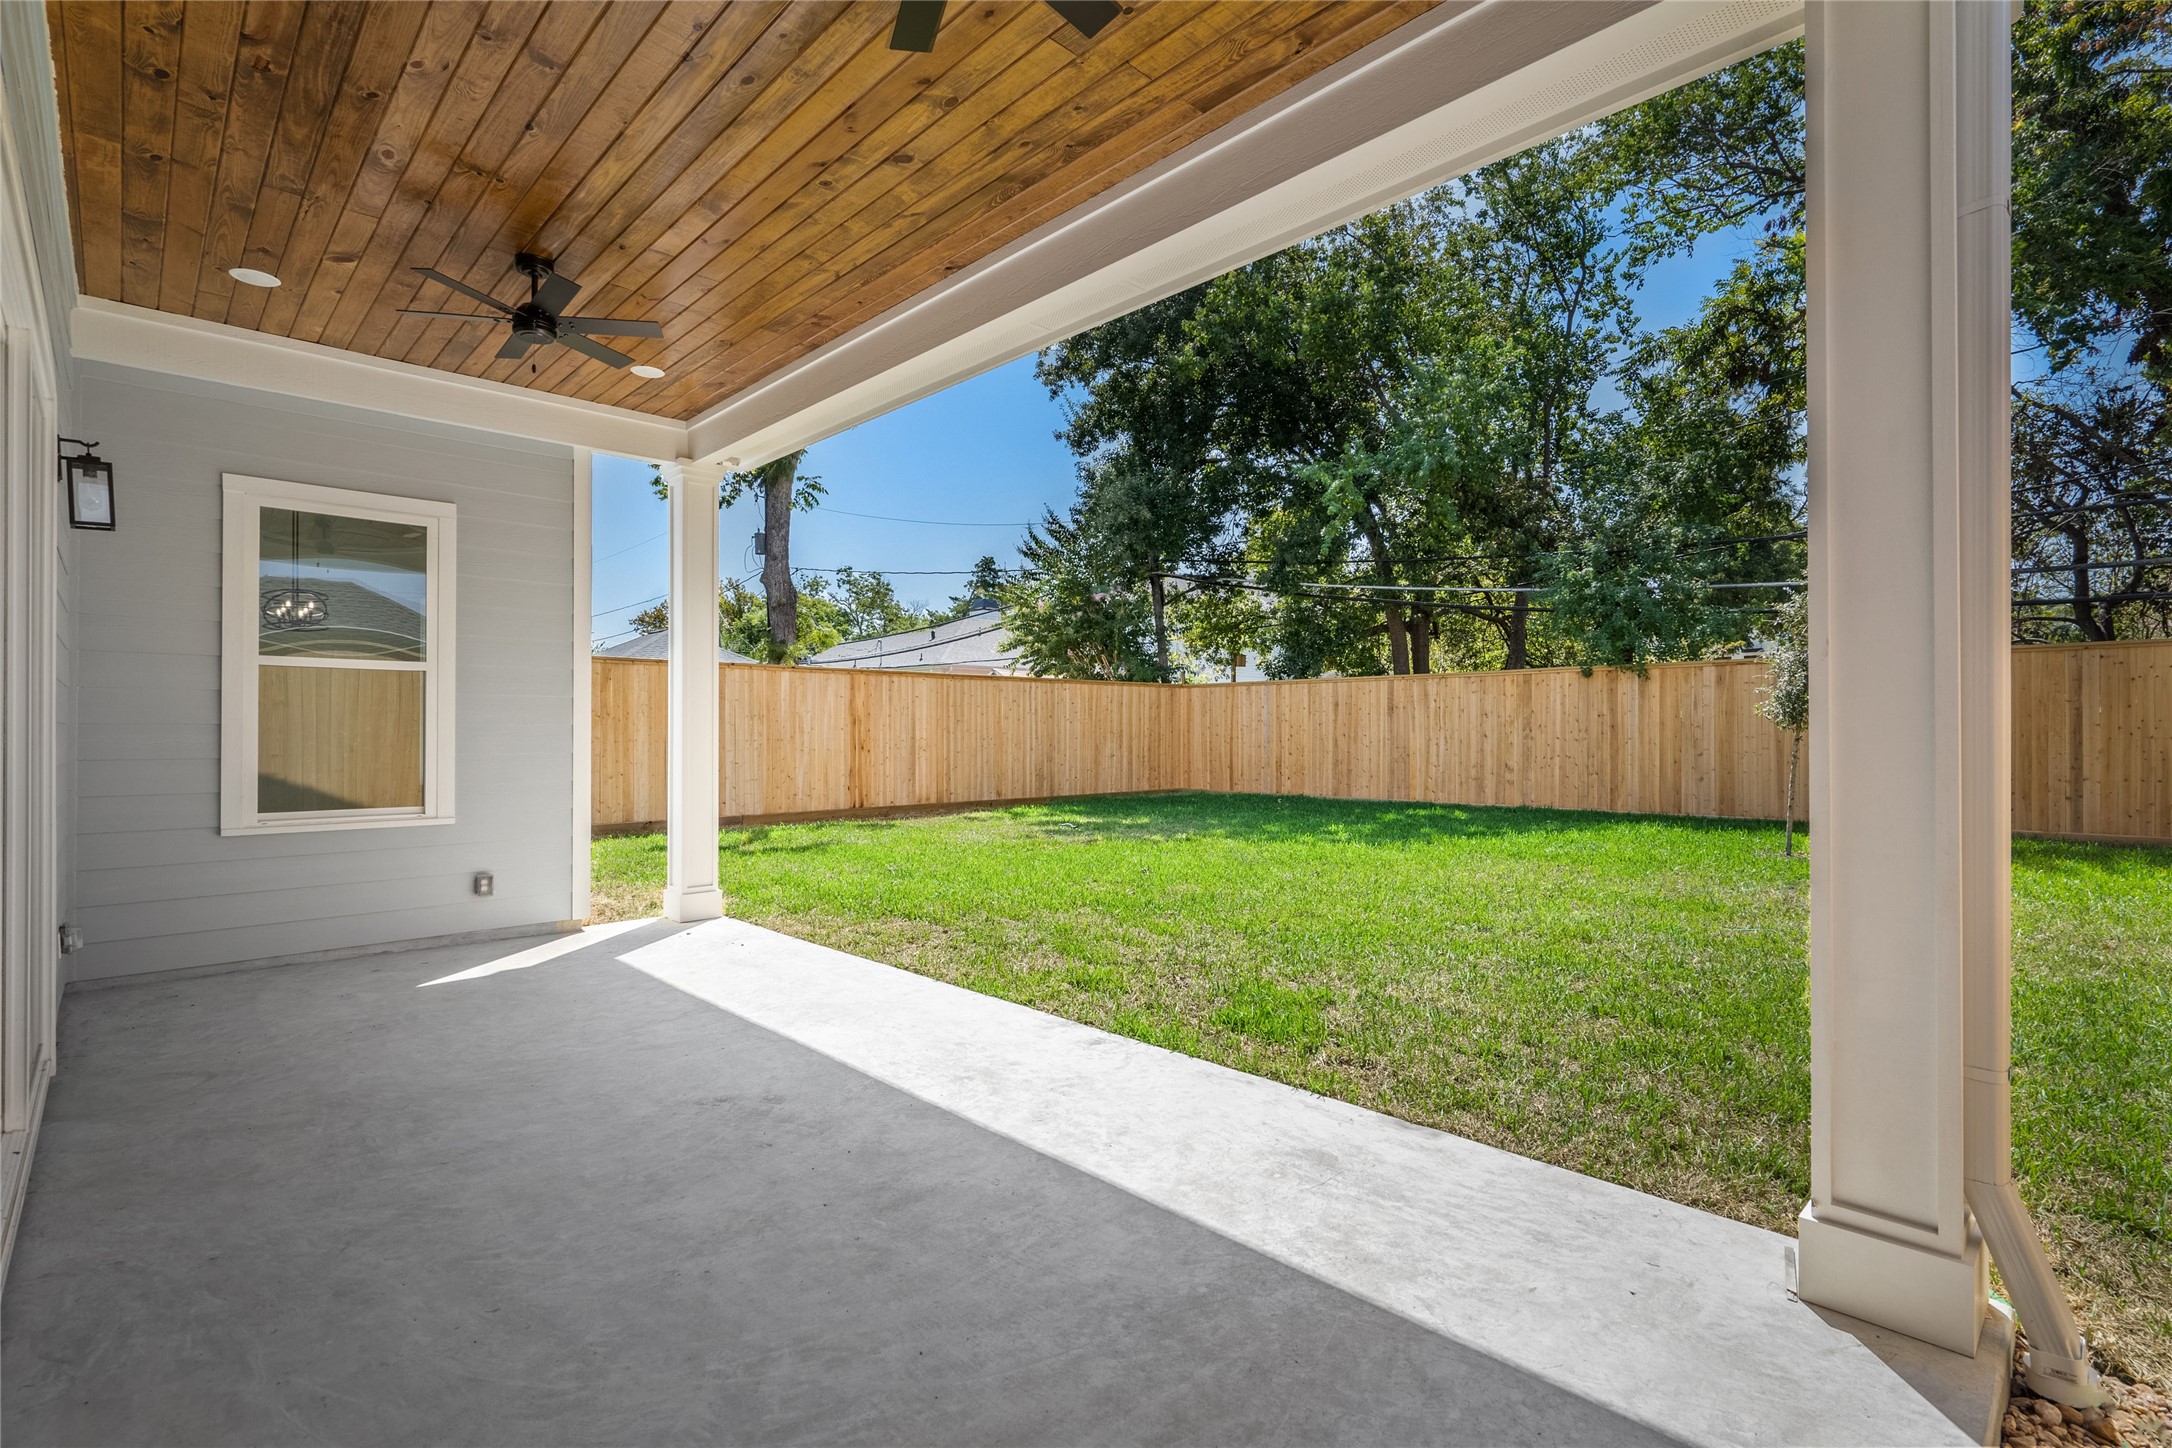 The large covered patio is spacious enough for outdoor furniture and is pre-plumbed for water and a gas line (just out of frame on the right). The expansive yard is a real differentiator with this home!